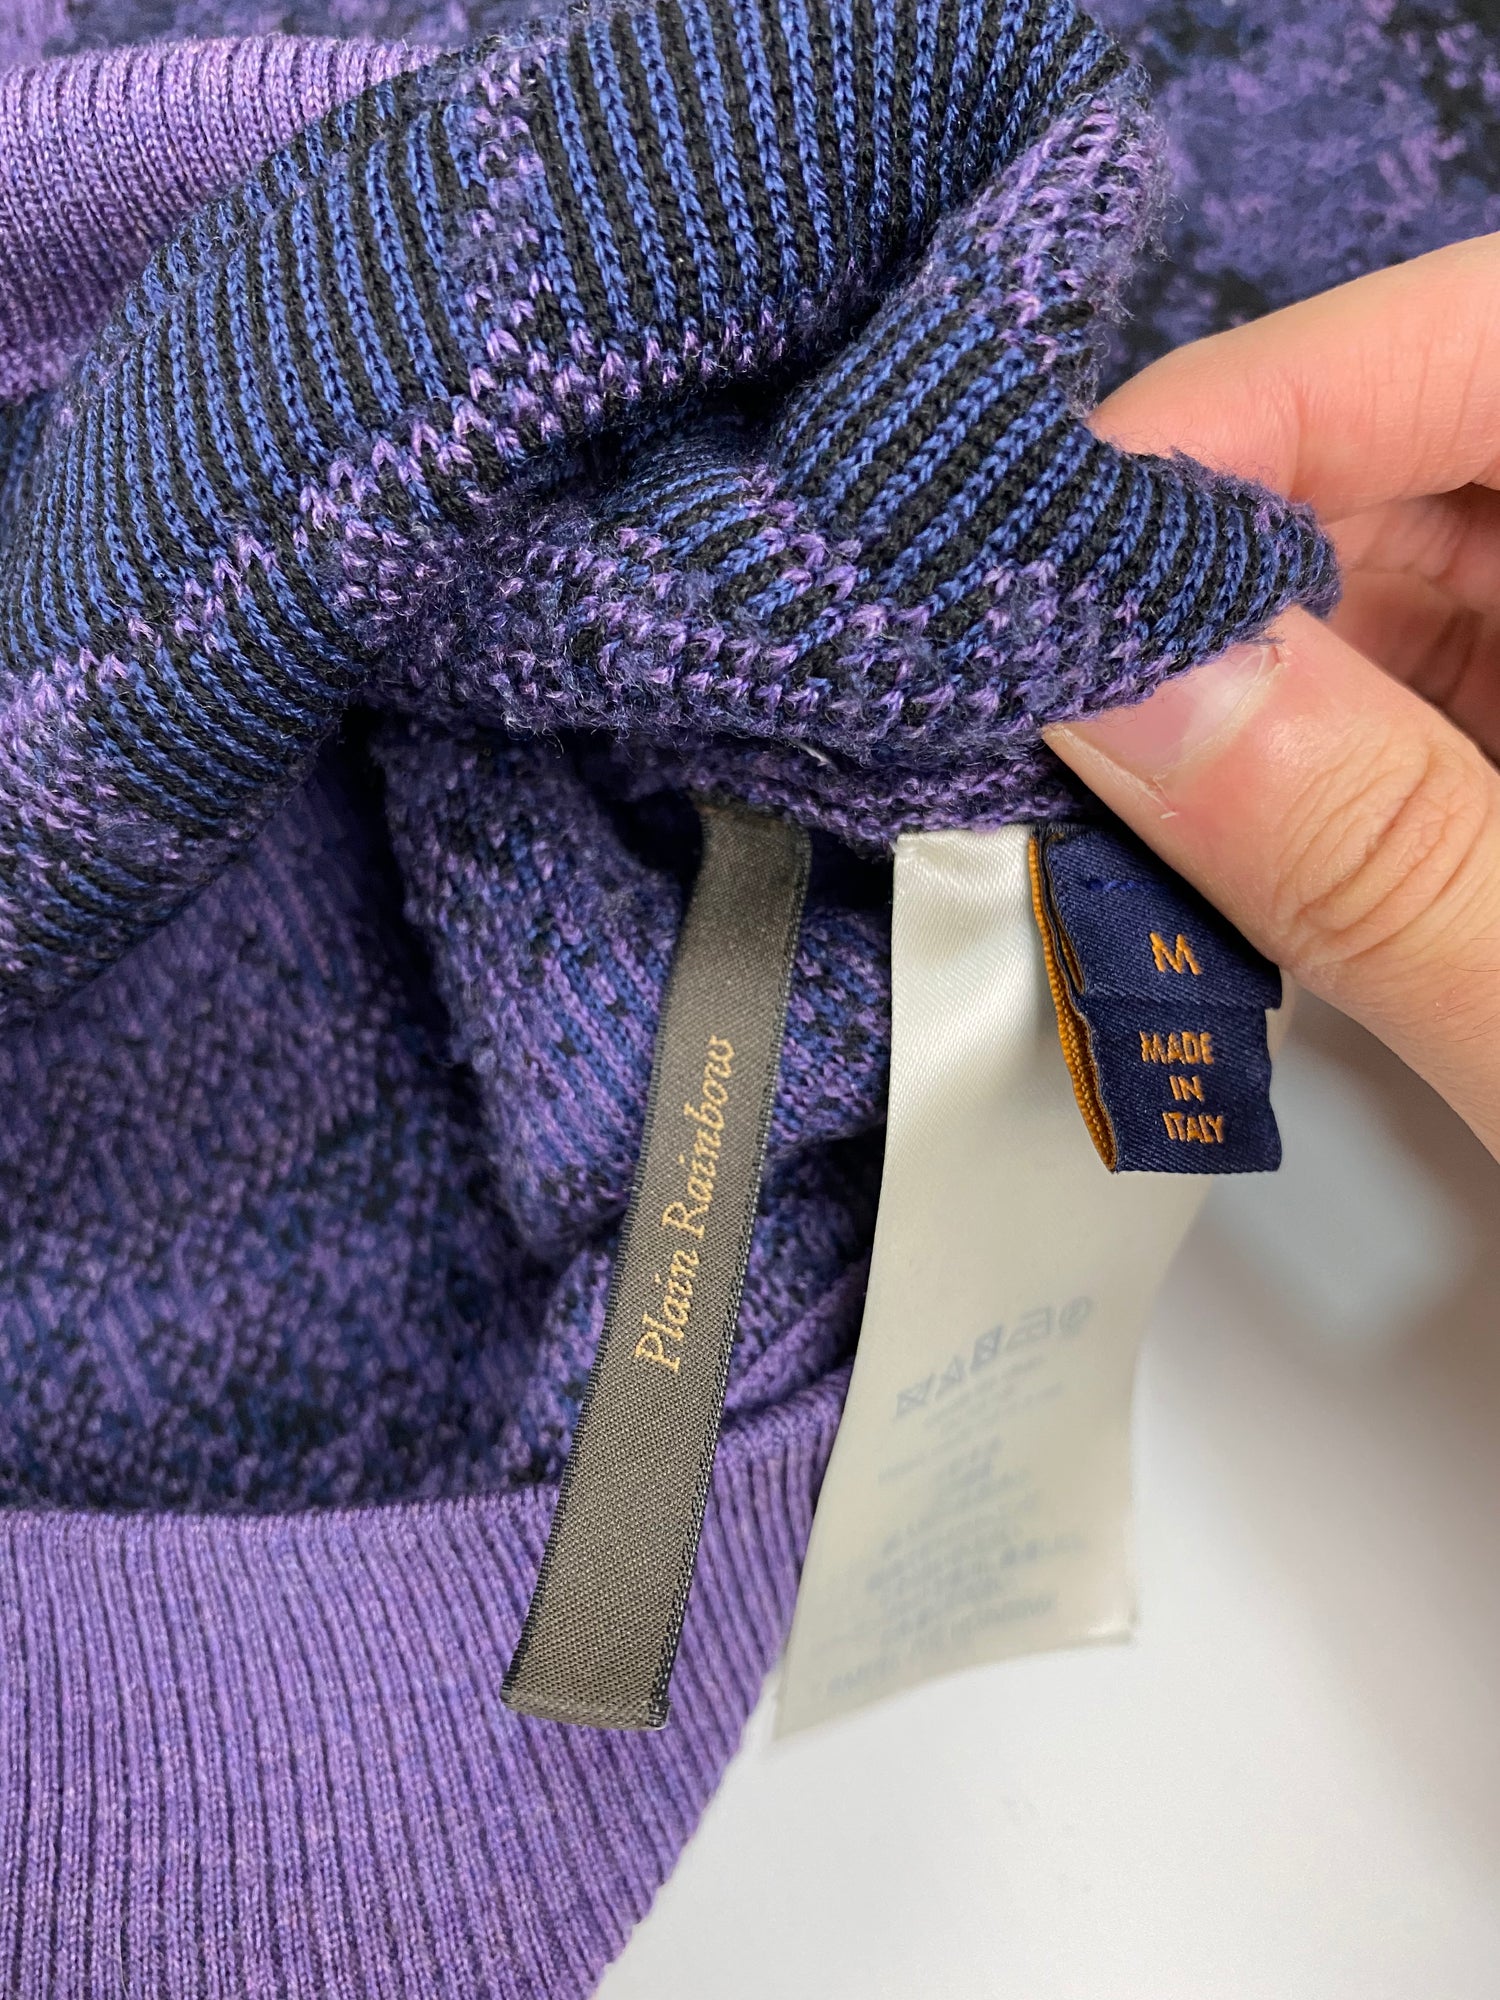 Louis Vuitton Wizard of Oz Wool Pullover - Purple Sweaters, Clothing -  LOU453688